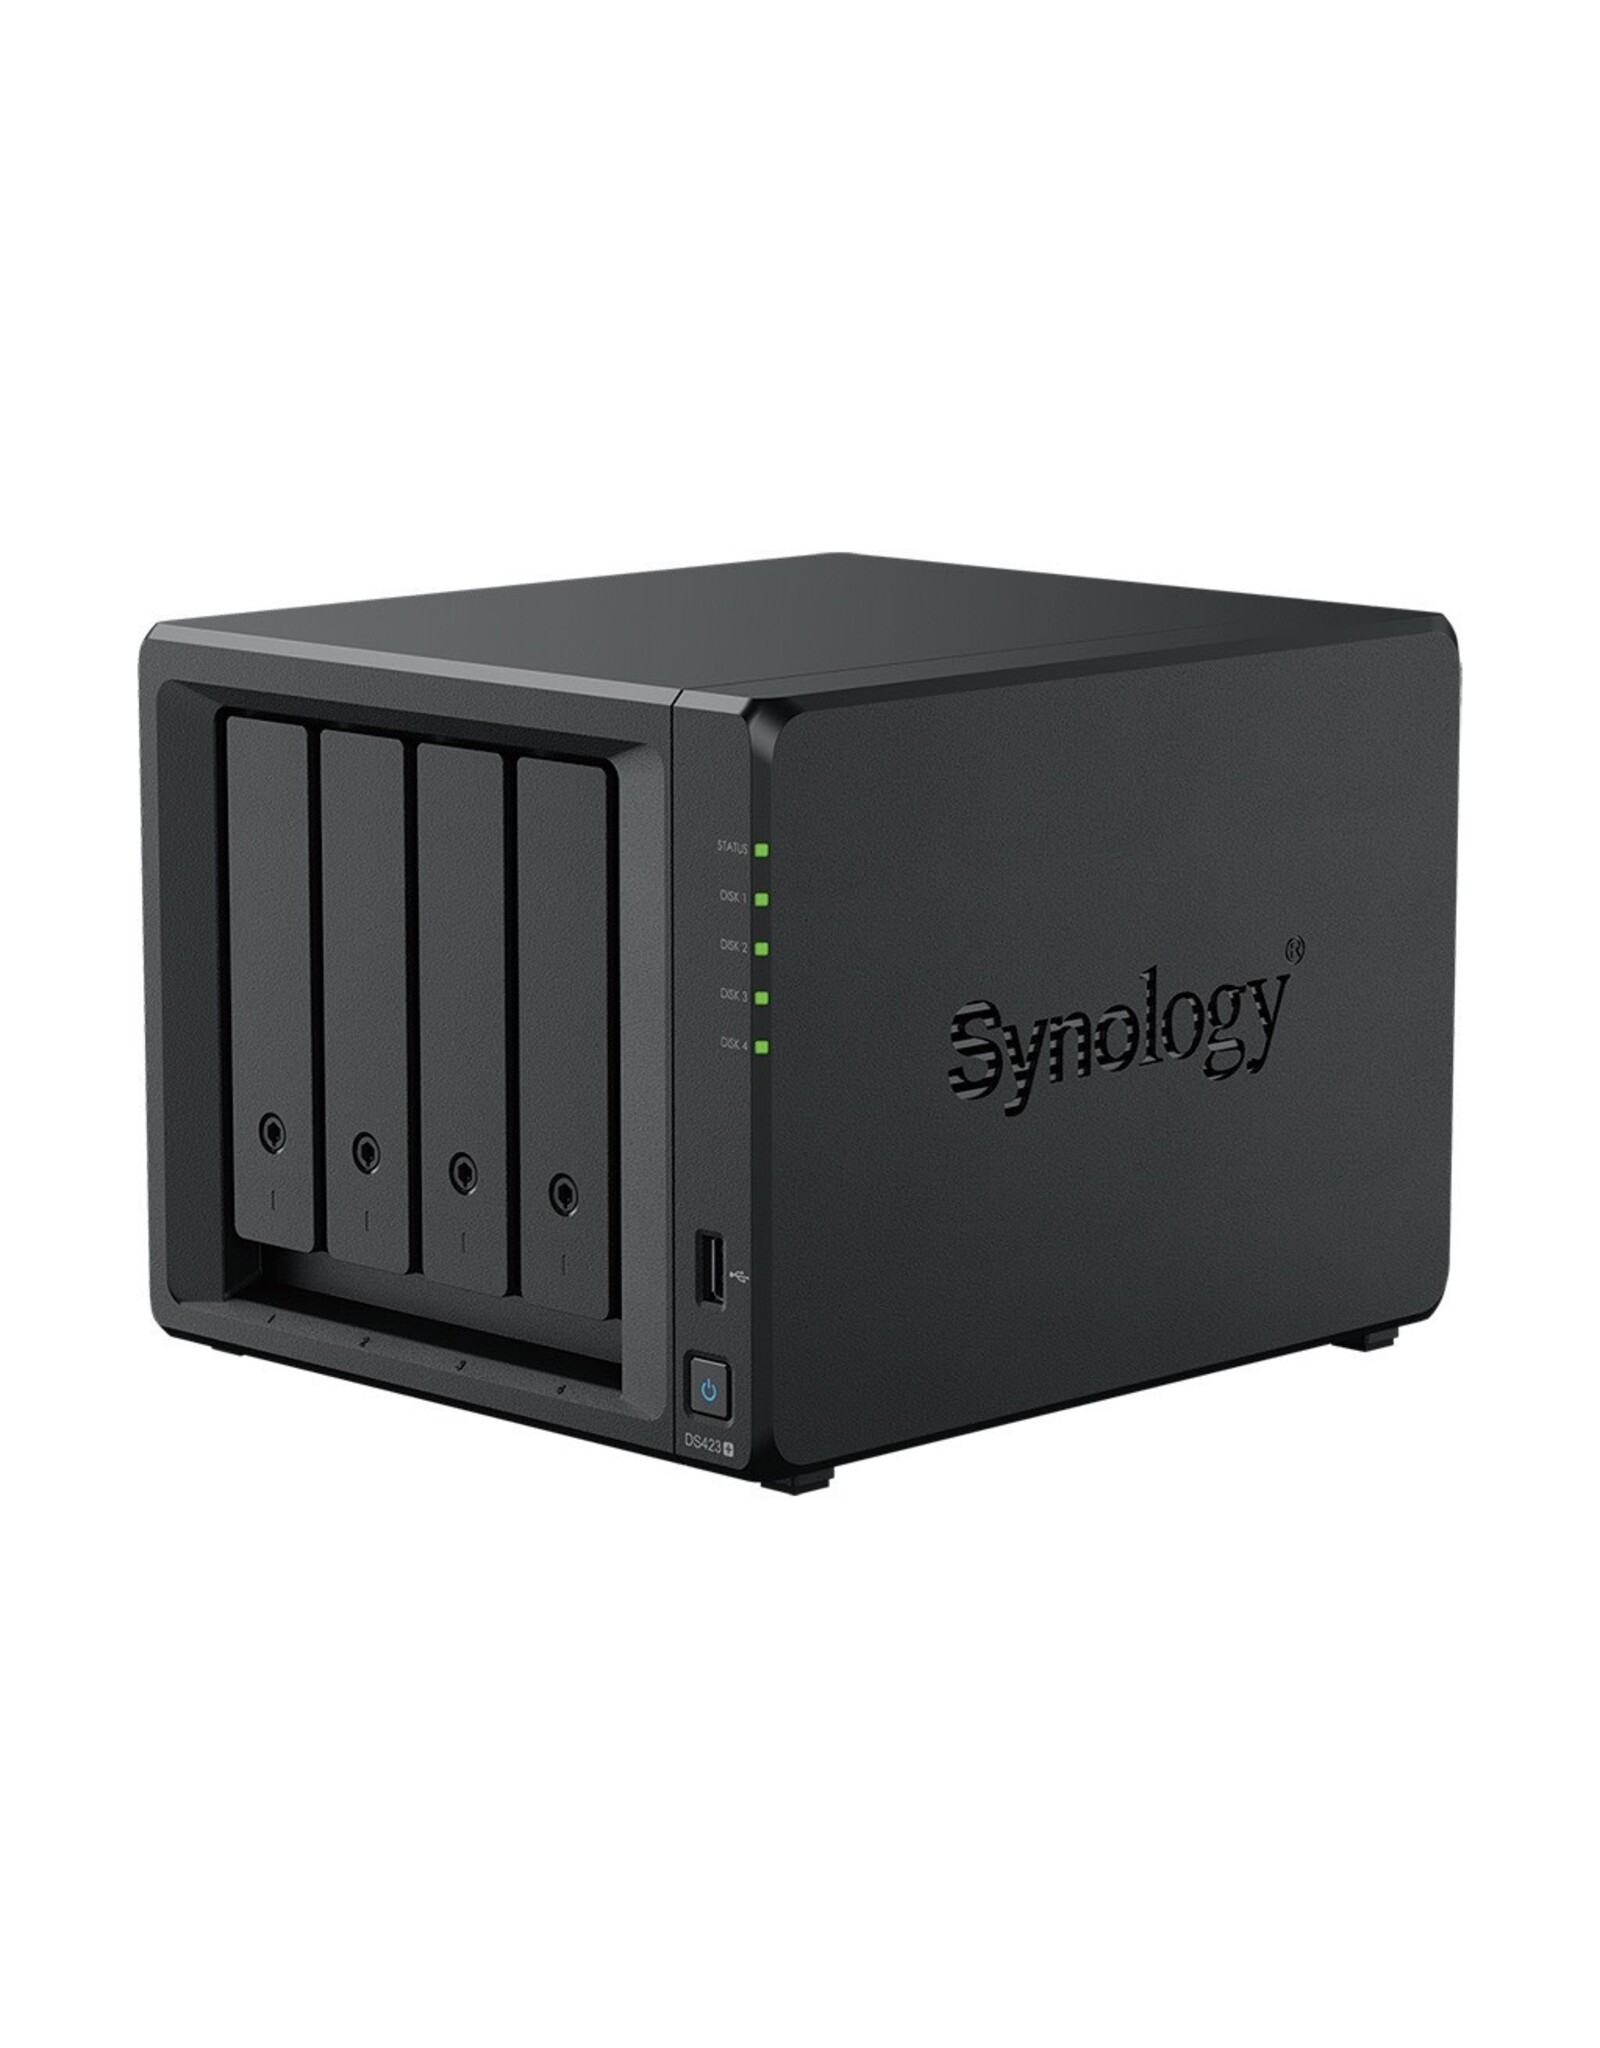 Synology Synology DS423+ NAS Server Intel Celeron 4-Core 2.7GHz / 2GB/ 2 x Built in Nvme M.2 2280/ 2 x 1GbE